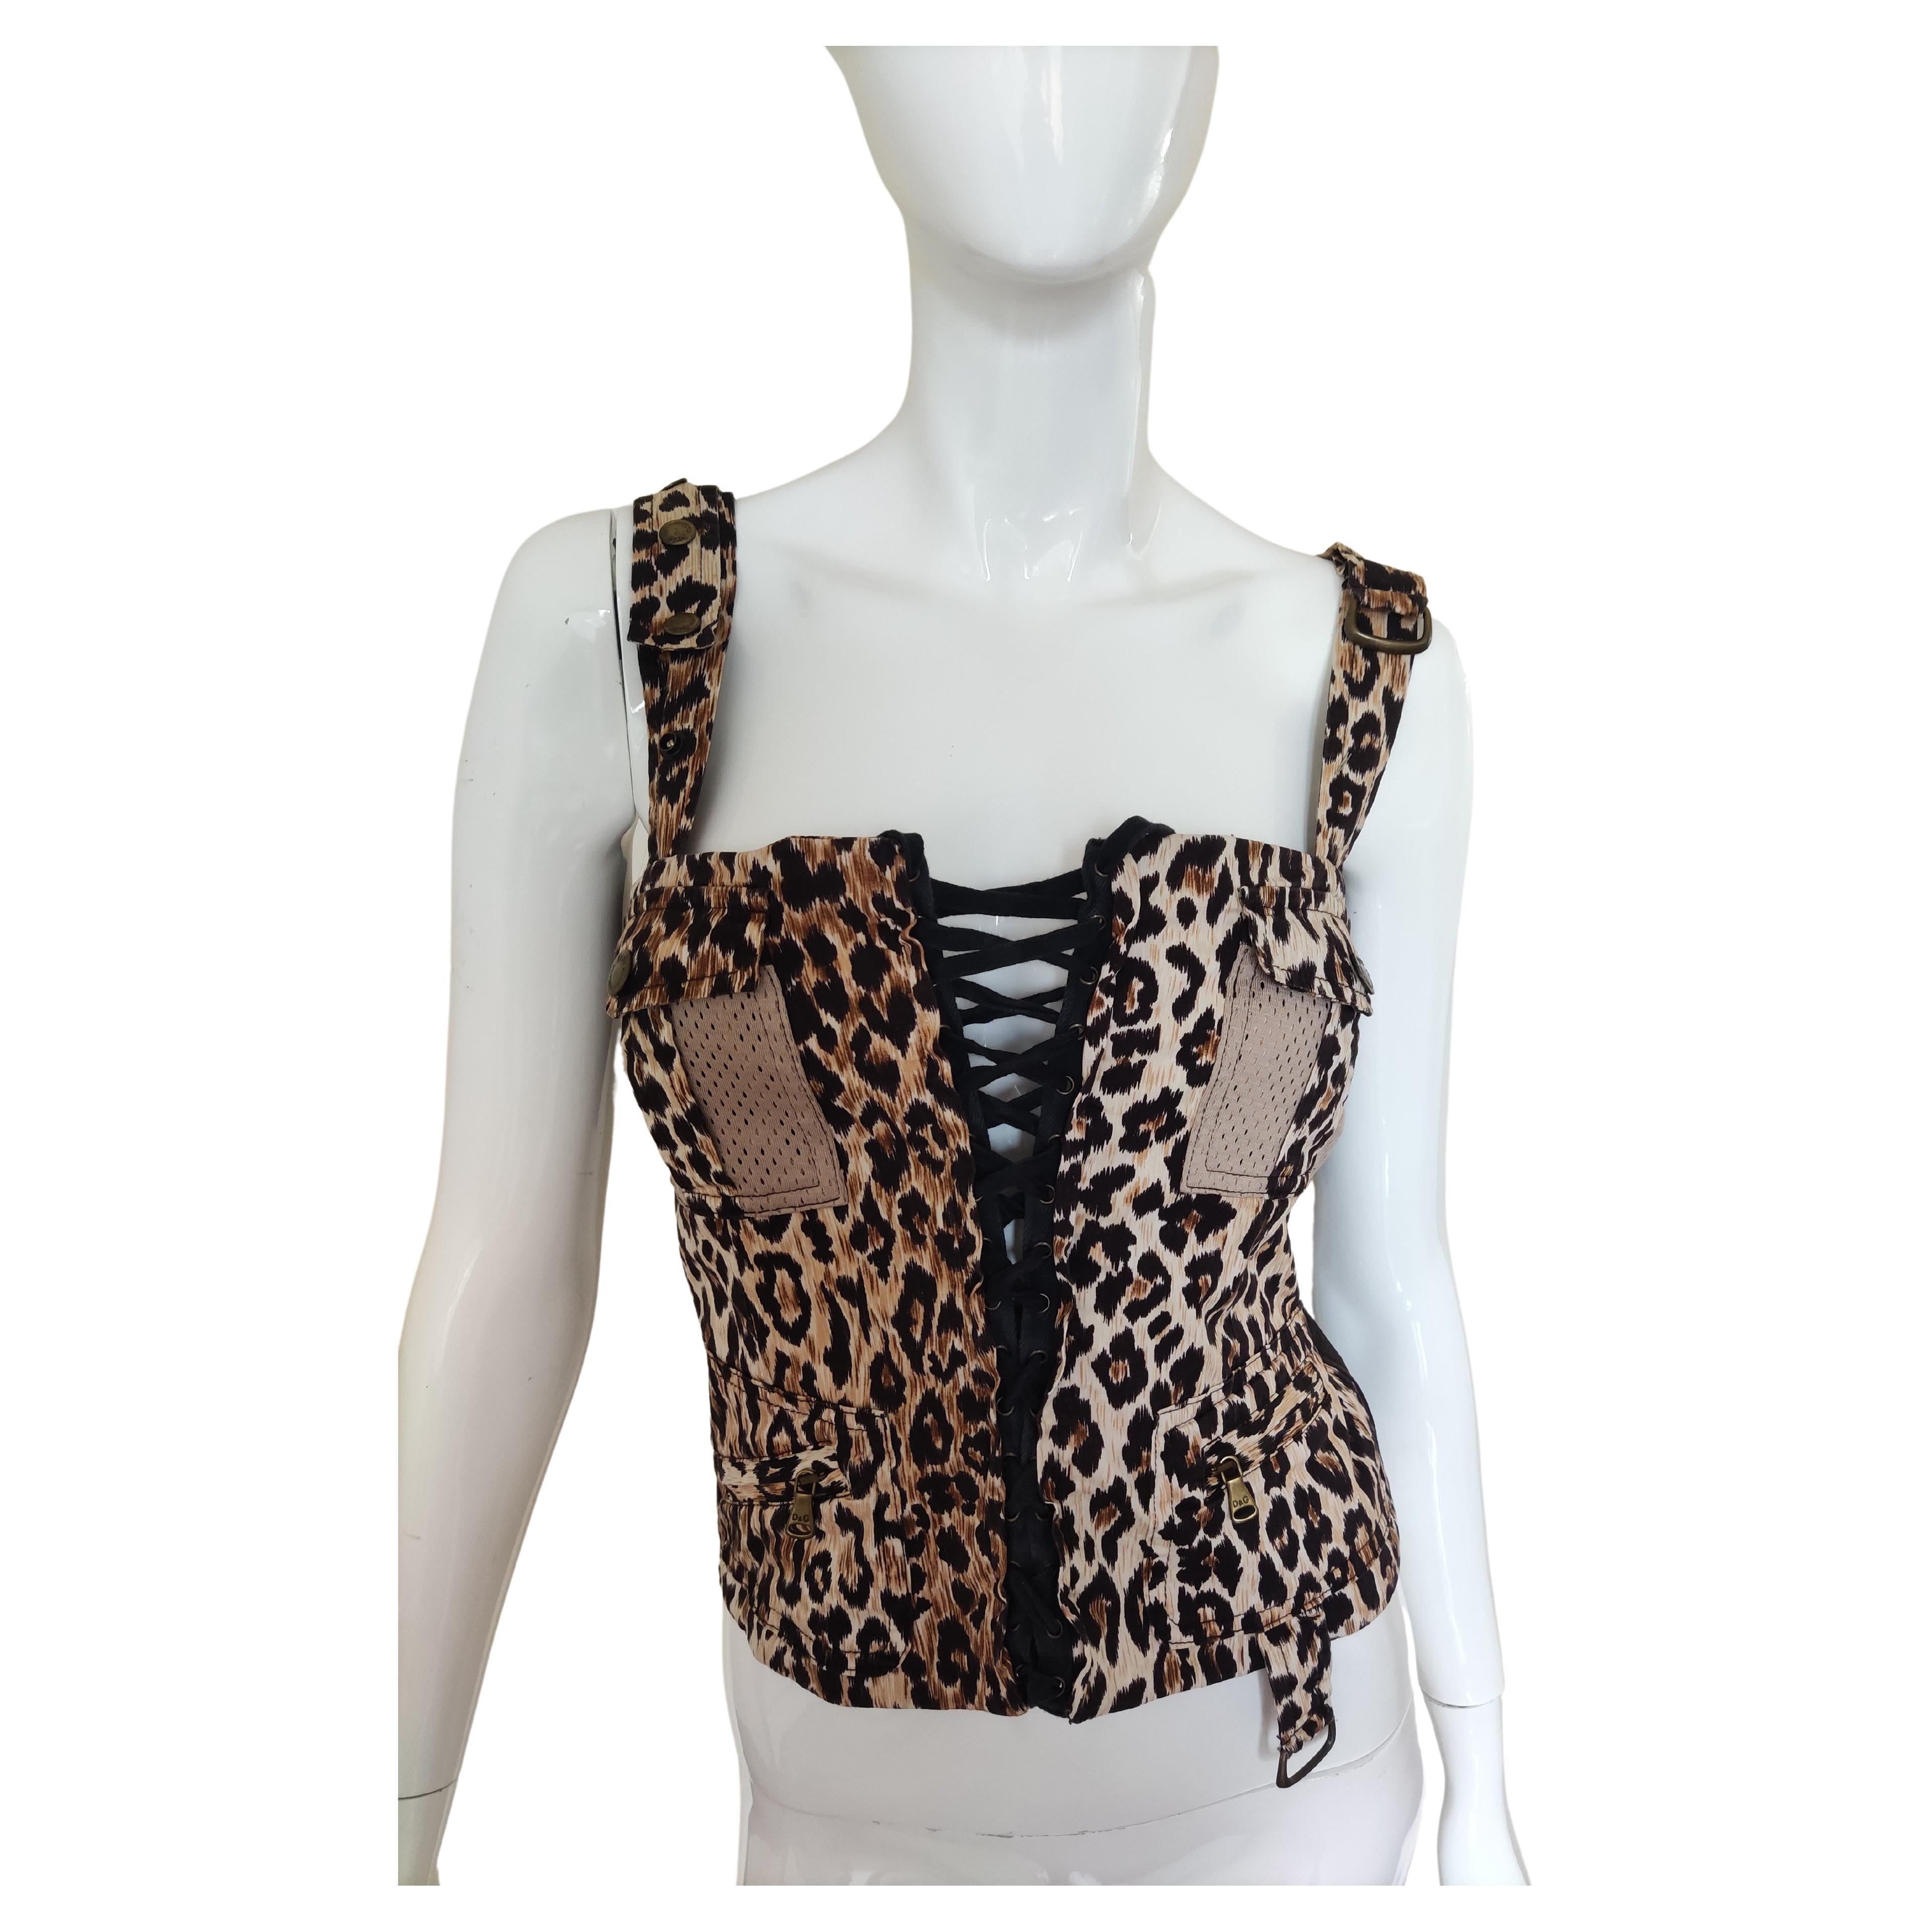 D&G Dolce and Gabbana Leopard Animal Tiger Bustier Vintage Cargo Top Corset